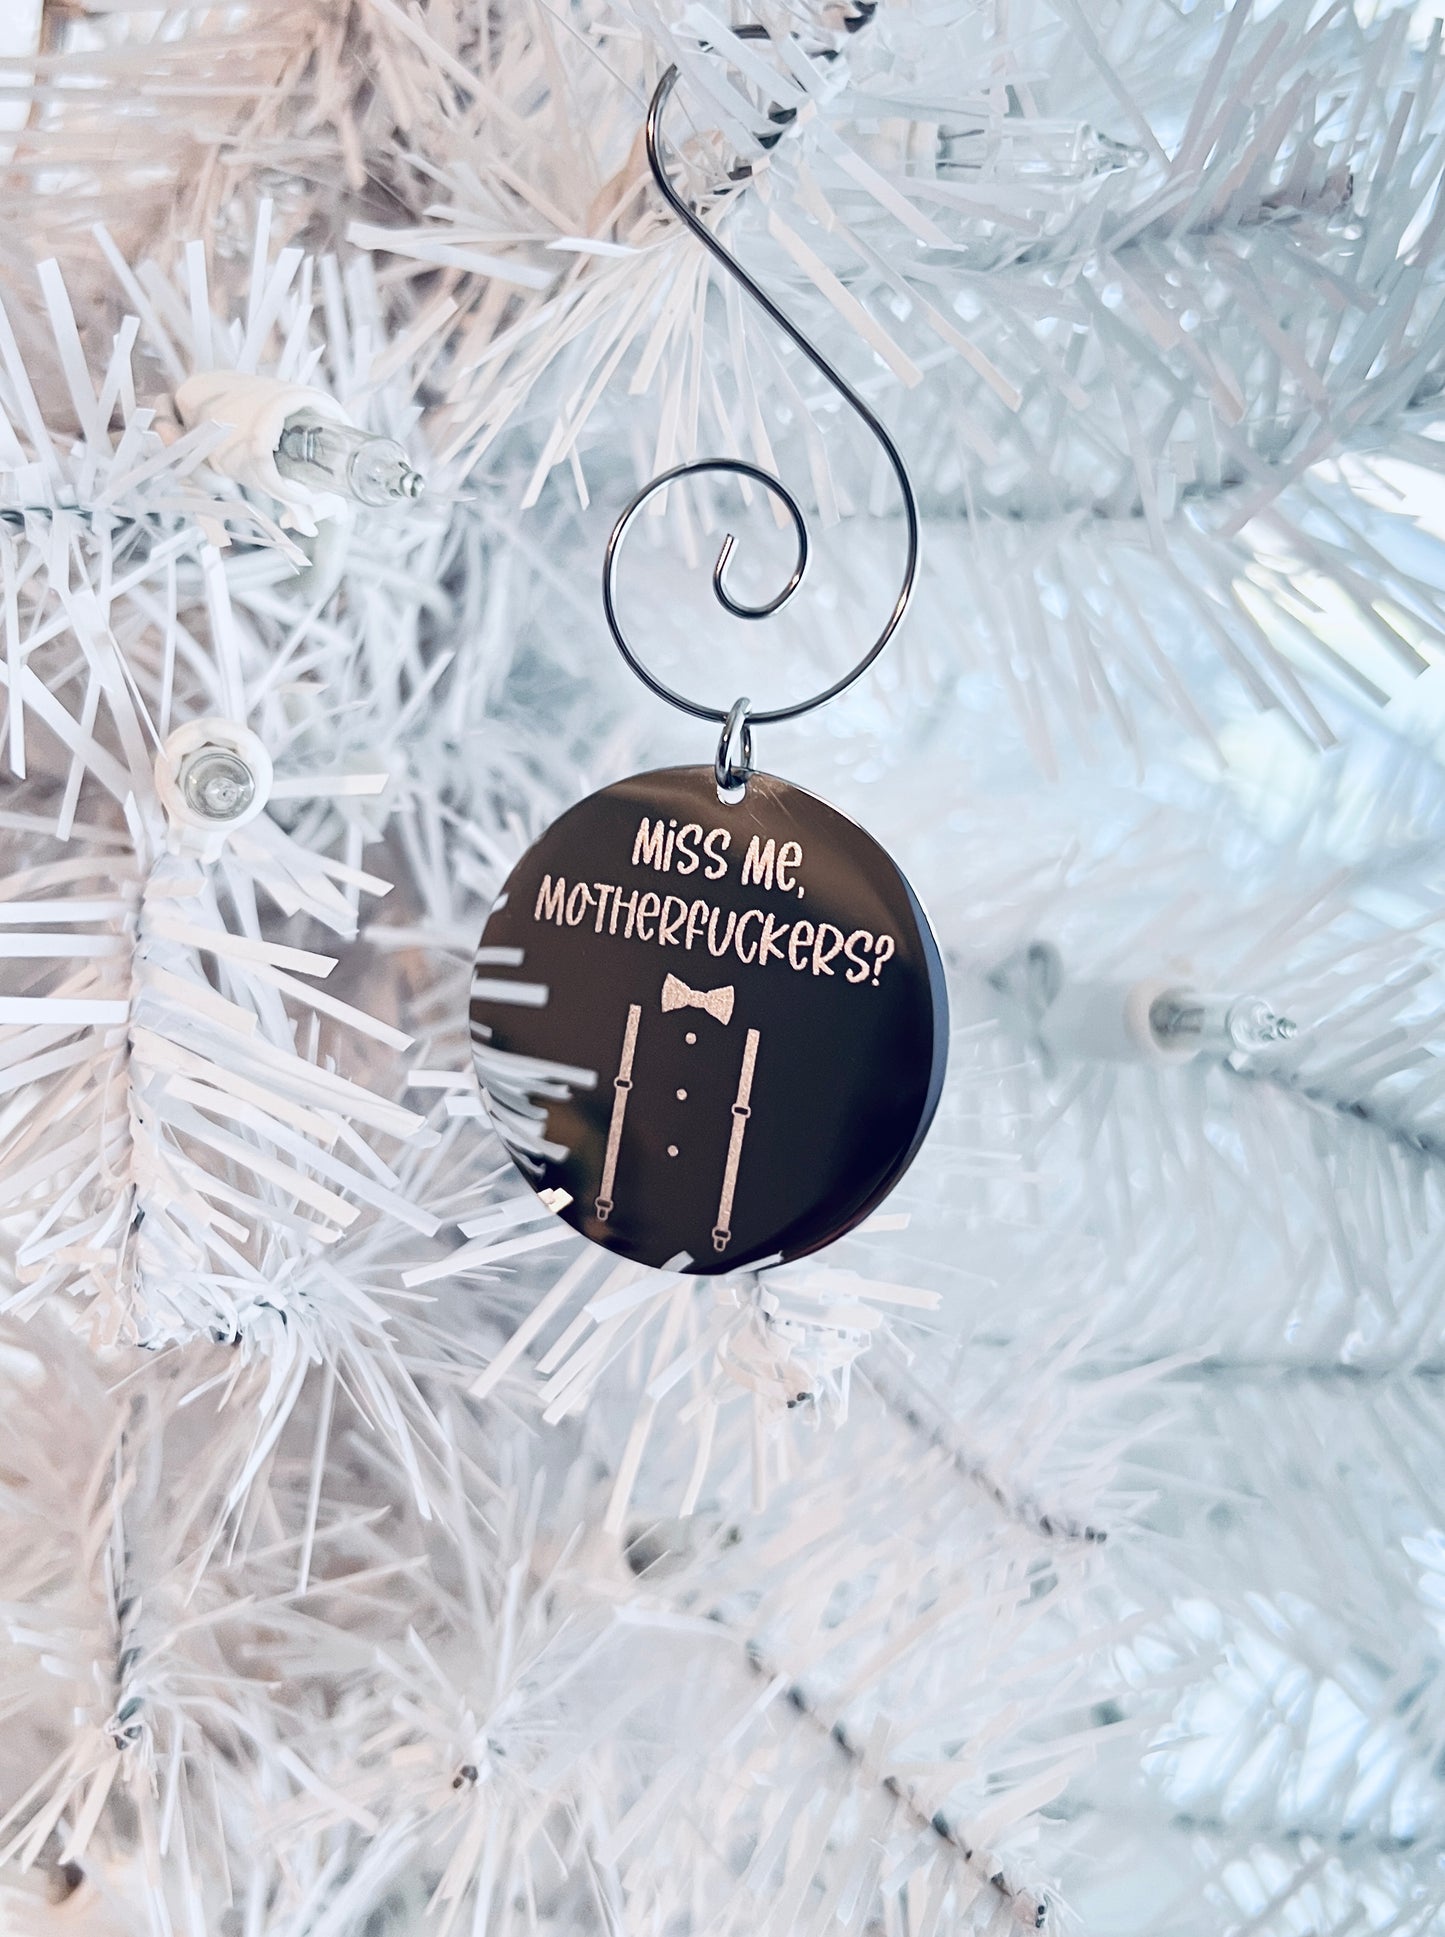 Miss Me, Motherfuckers? | Preppy | Engraved Holiday Ornament